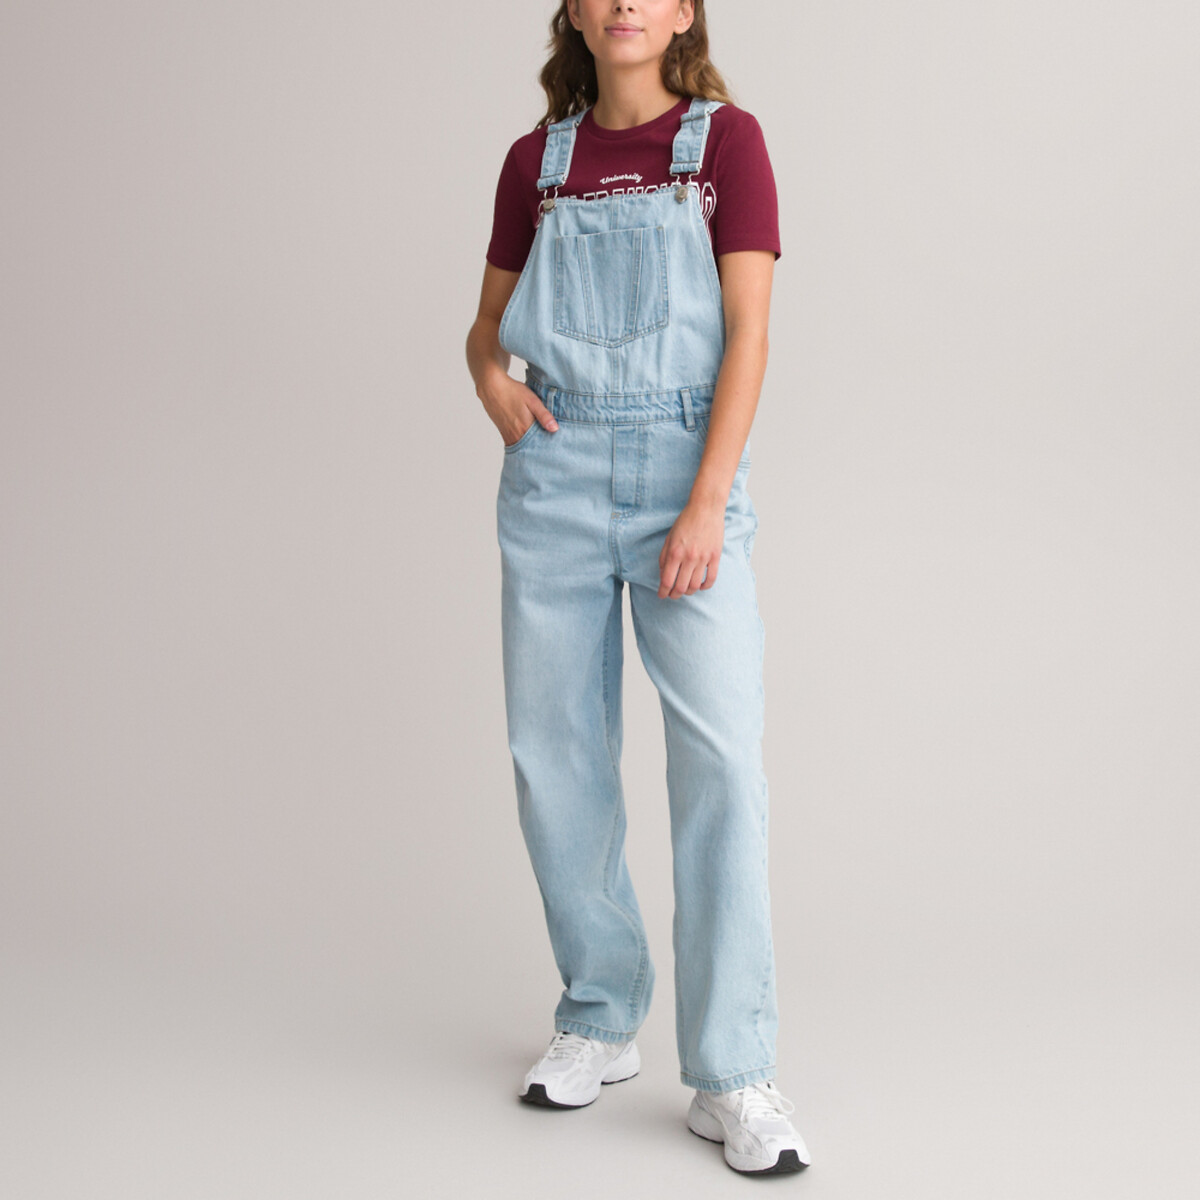 Denim Dungarees By La Redoute